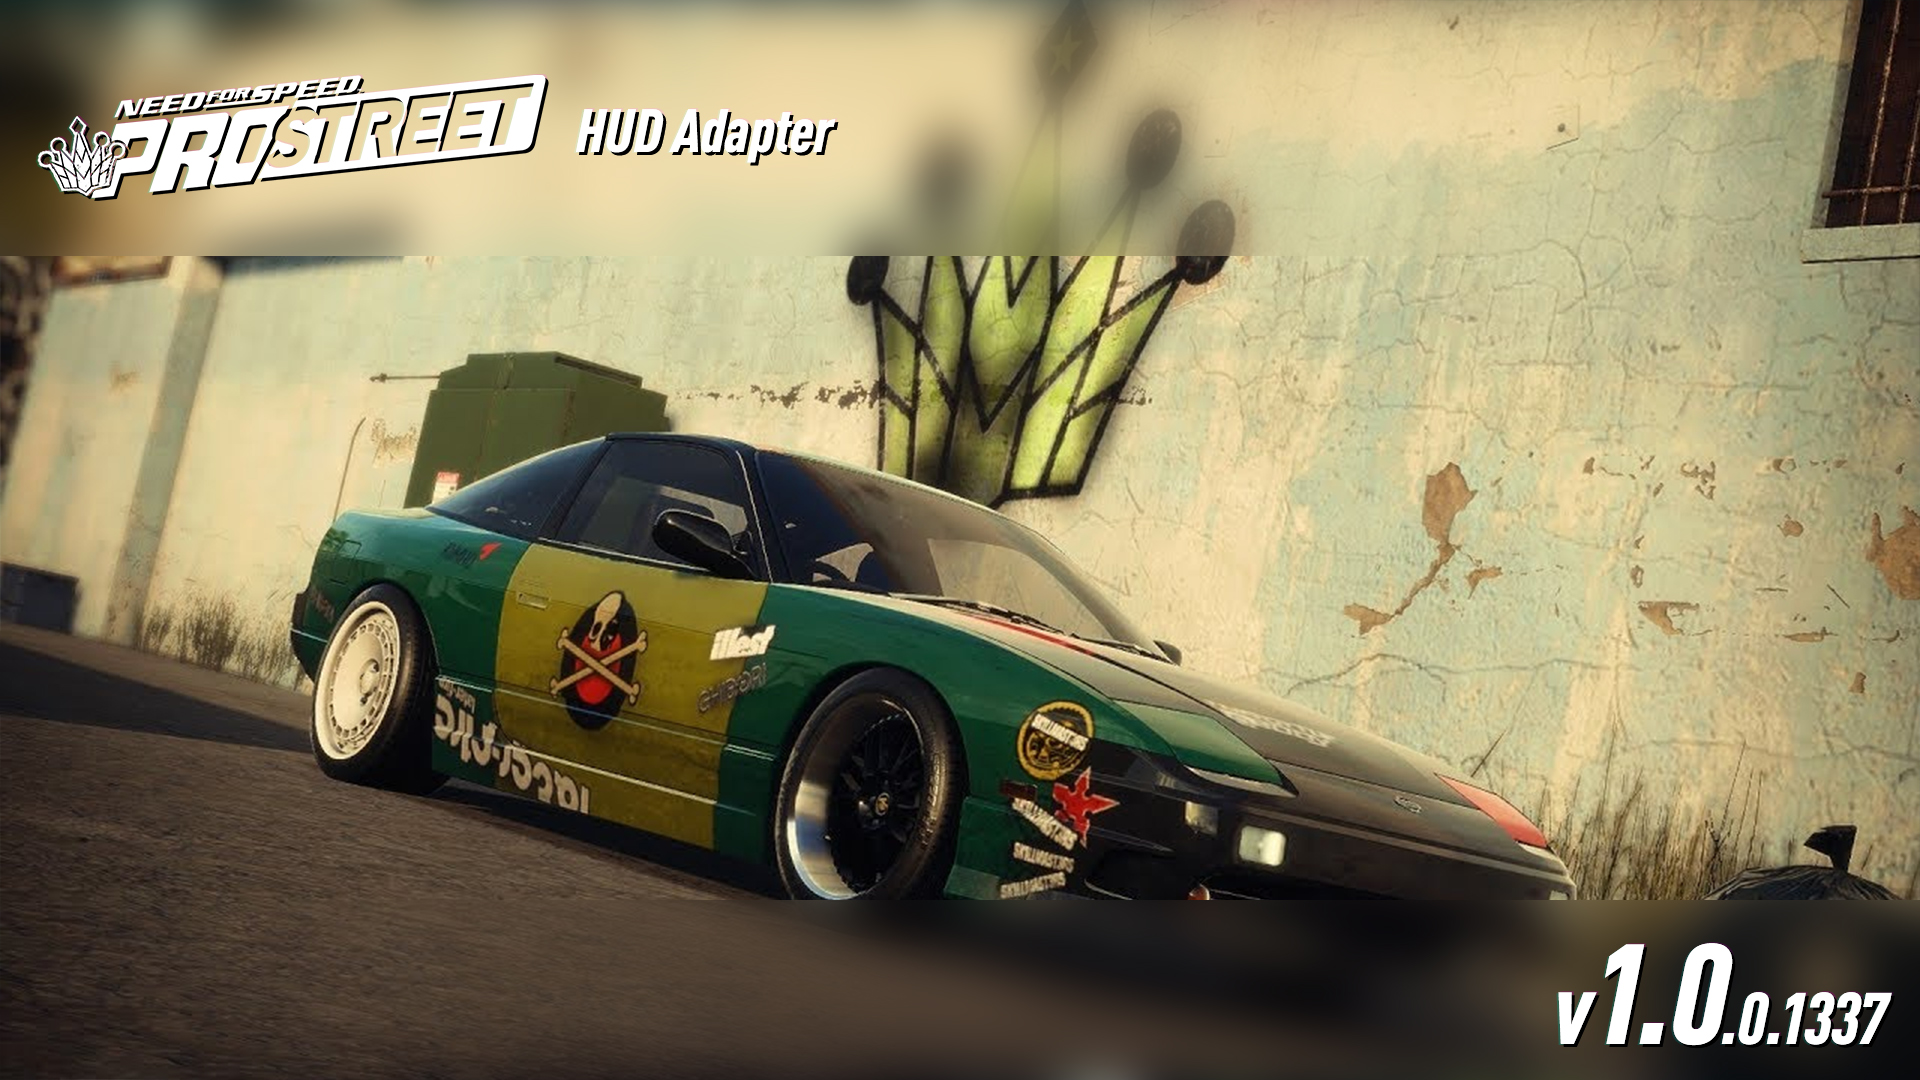 Need for Speed: ProStreet - PCGamingWiki PCGW - bugs, fixes